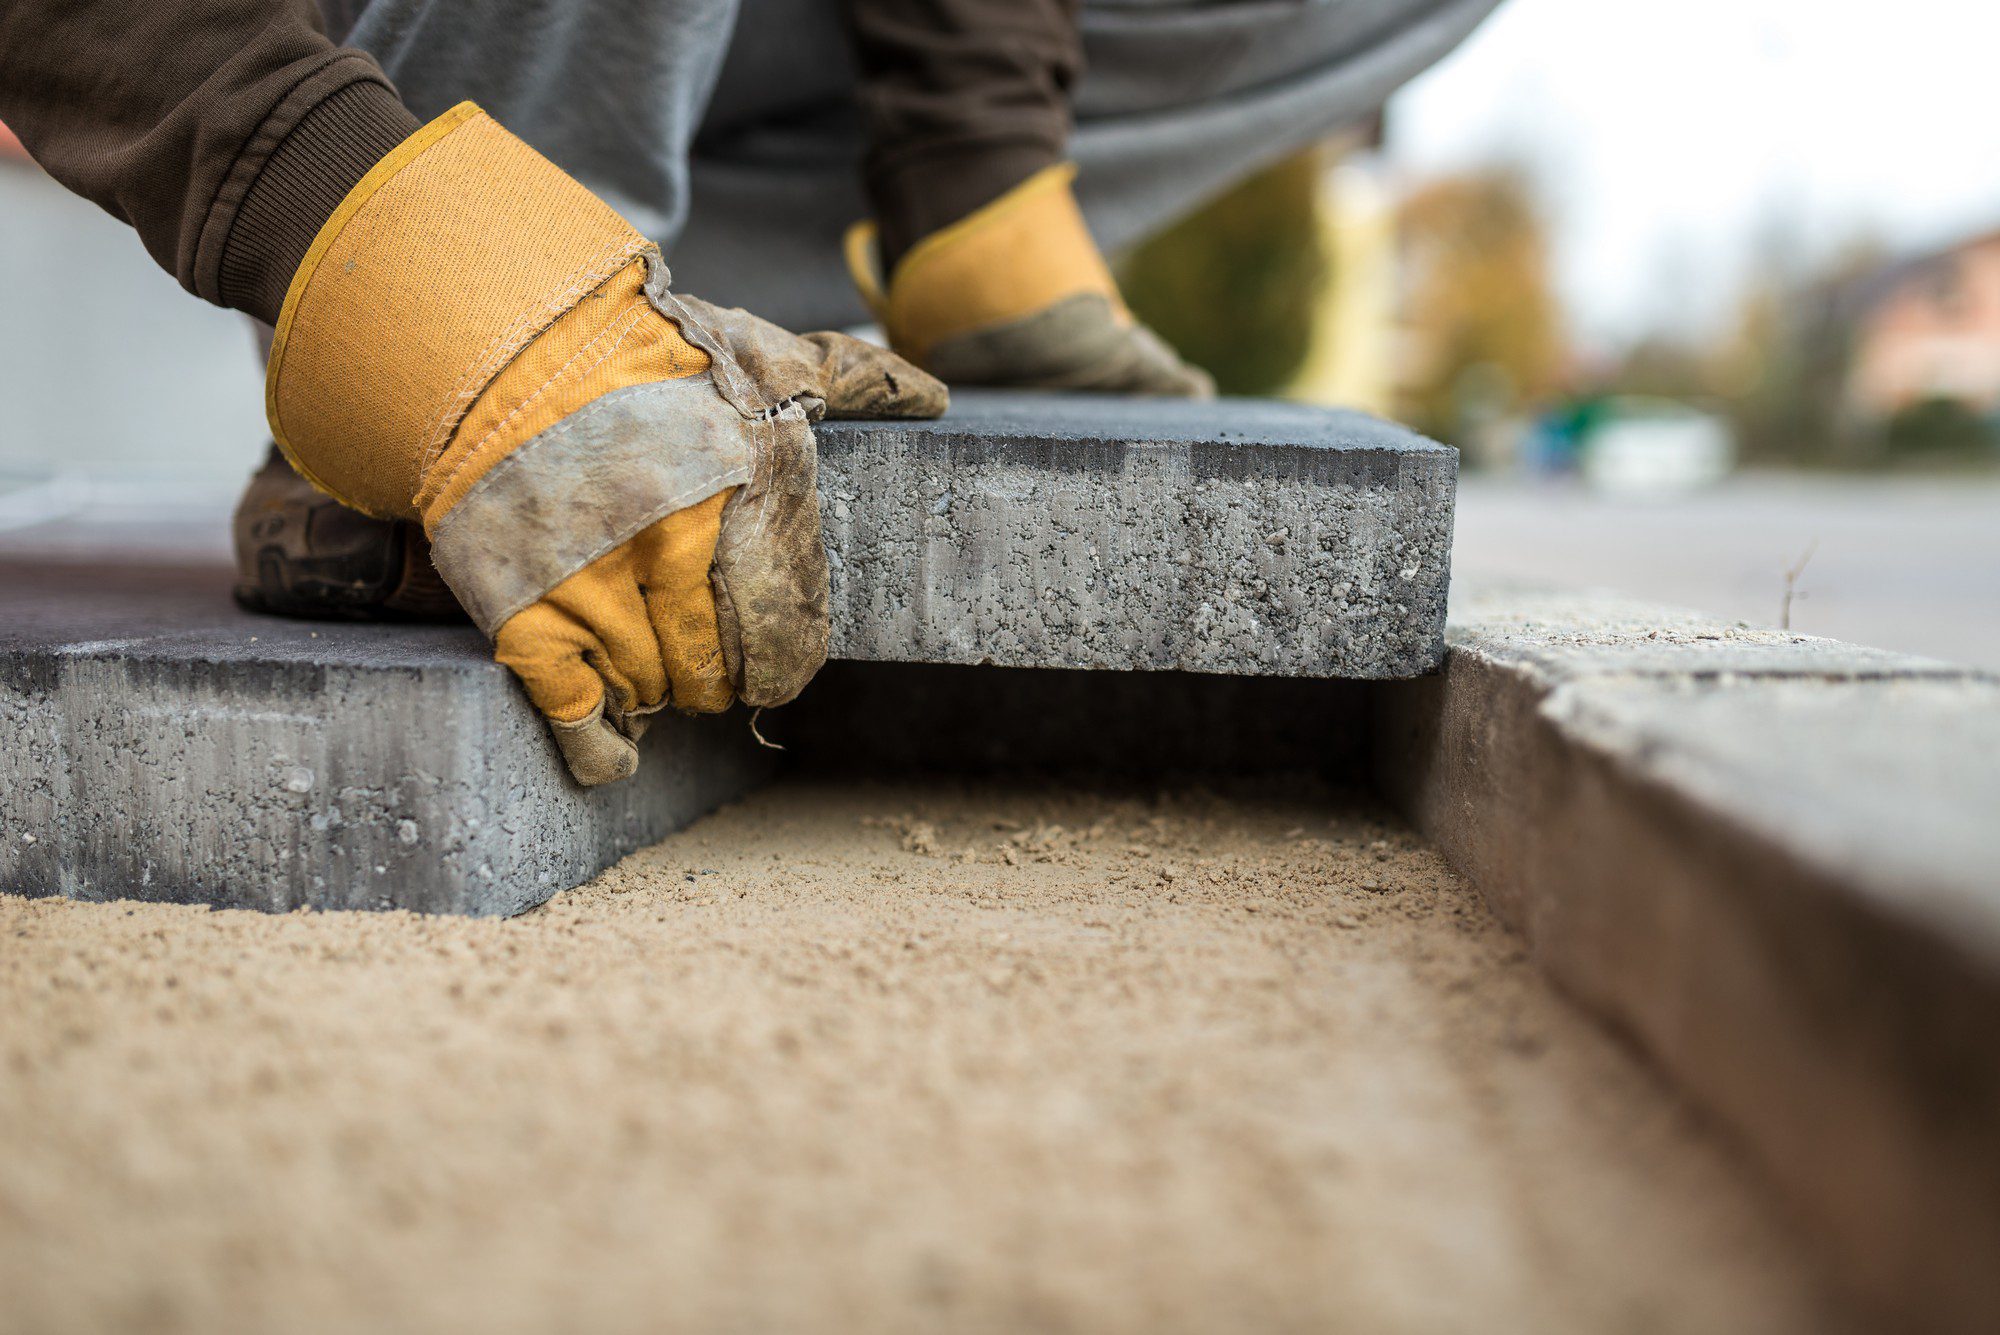 The image shows a close-up view of a person's hands clad in yellow work gloves while laying a gray concrete paving stone or slab. The individual appears to be installing or repairing a paved surface such as a sidewalk, pathway, or patio. The concrete slab is being placed on a bed of sand to ensure a level and stable foundation. The background is blurred, but it seems to be an outdoor setting, possibly in a residential area given the glimpse of a street and houses. The focus is on the worker's hands, emphasizing the manual labour and craftsmanship involved in this type of construction work.